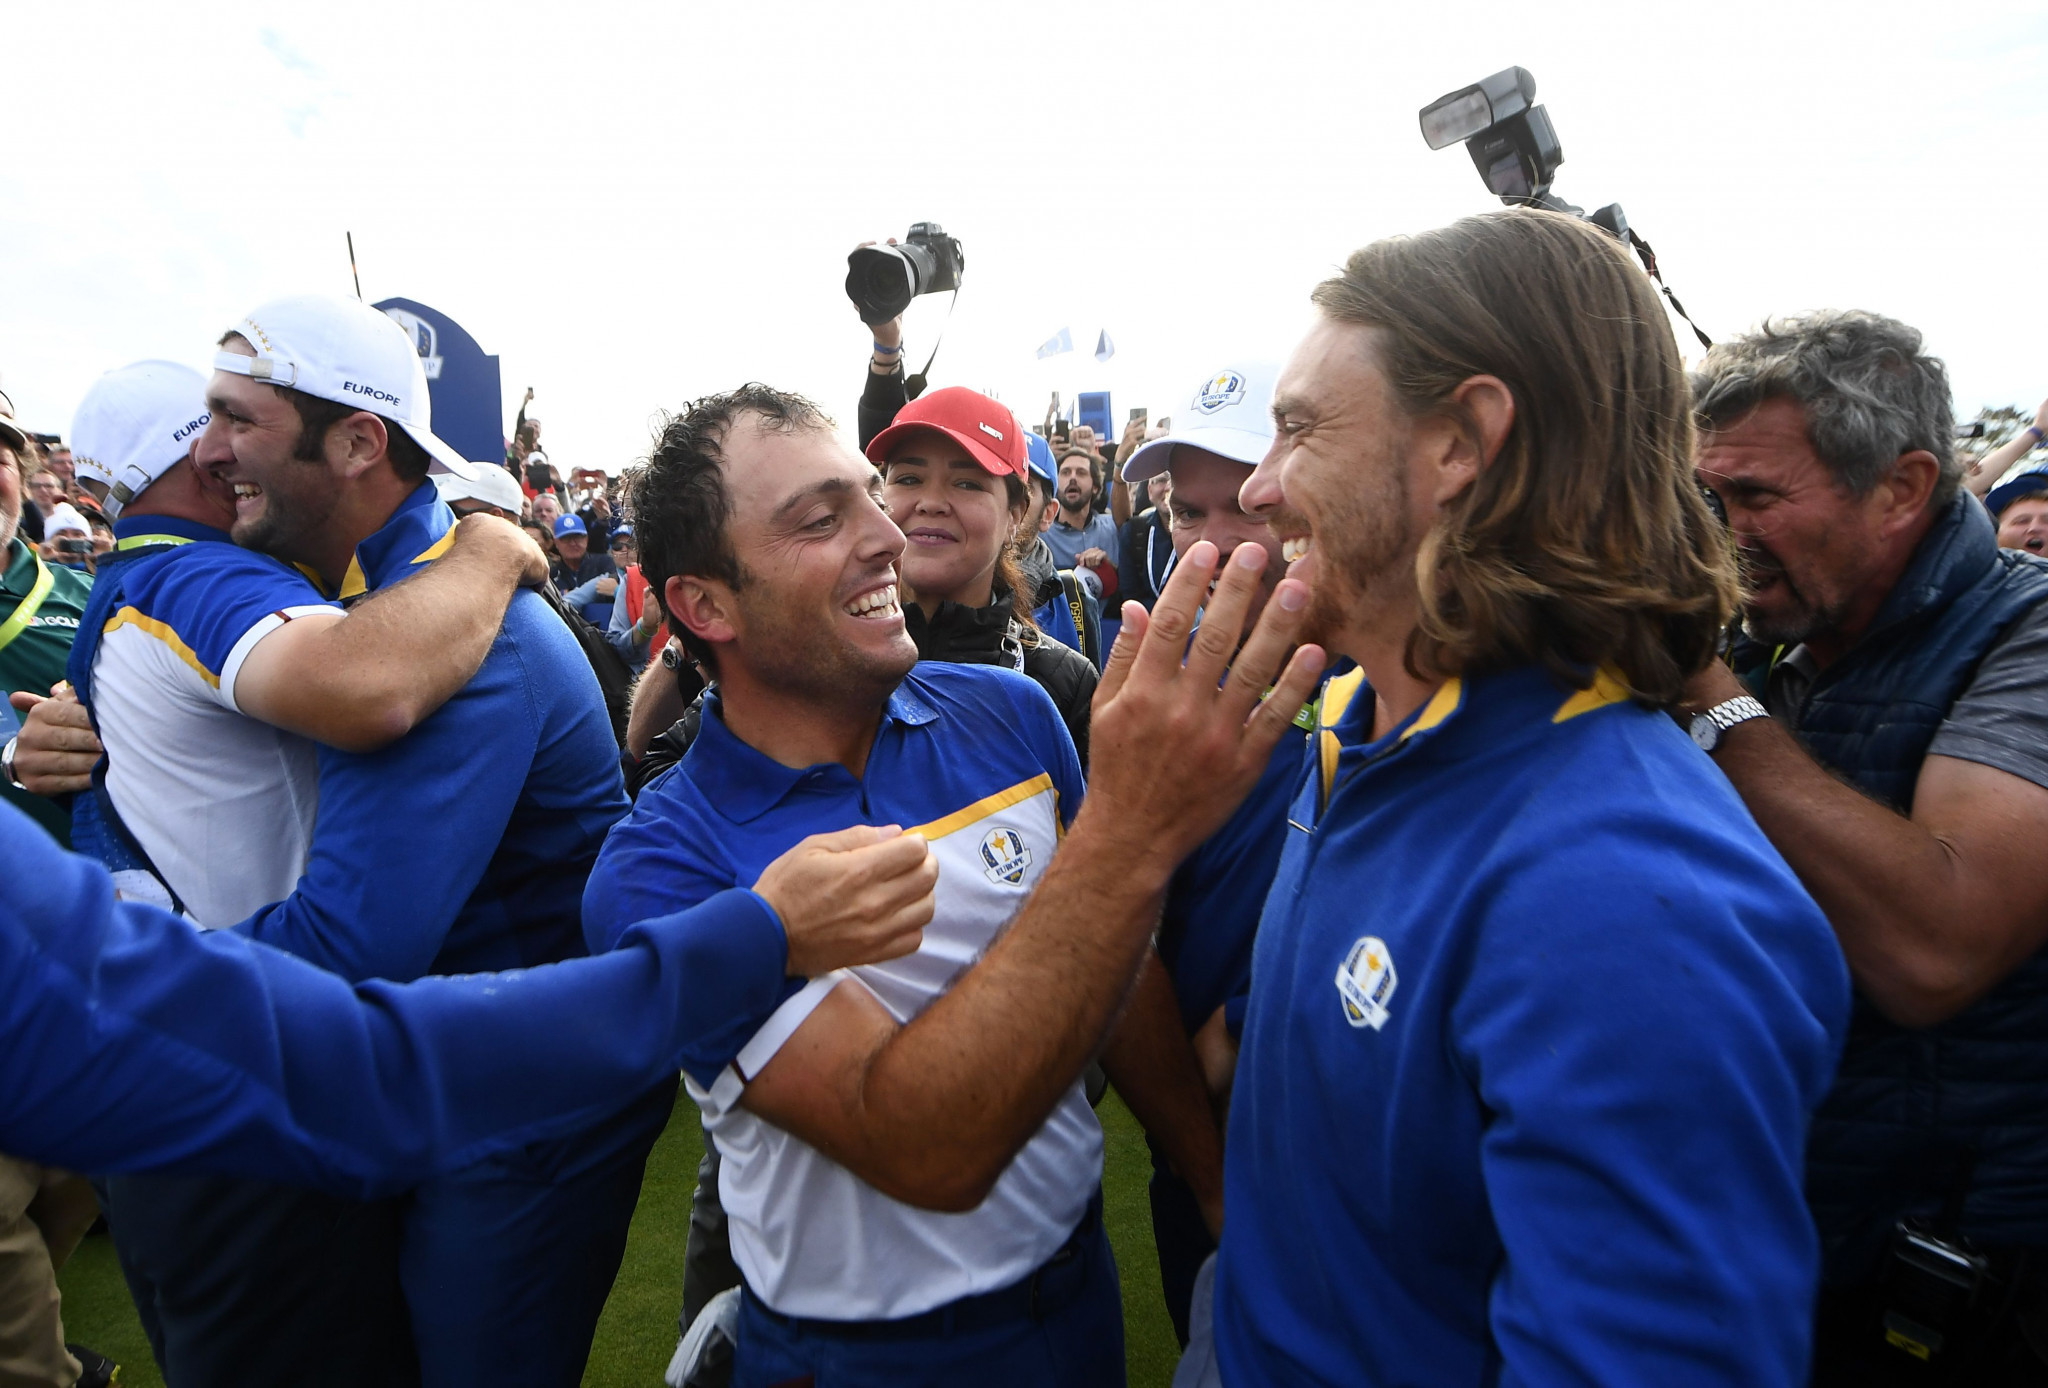 The Ryder Cup catches the attention of casual golf fans as well as avid viewers ©Getty Images